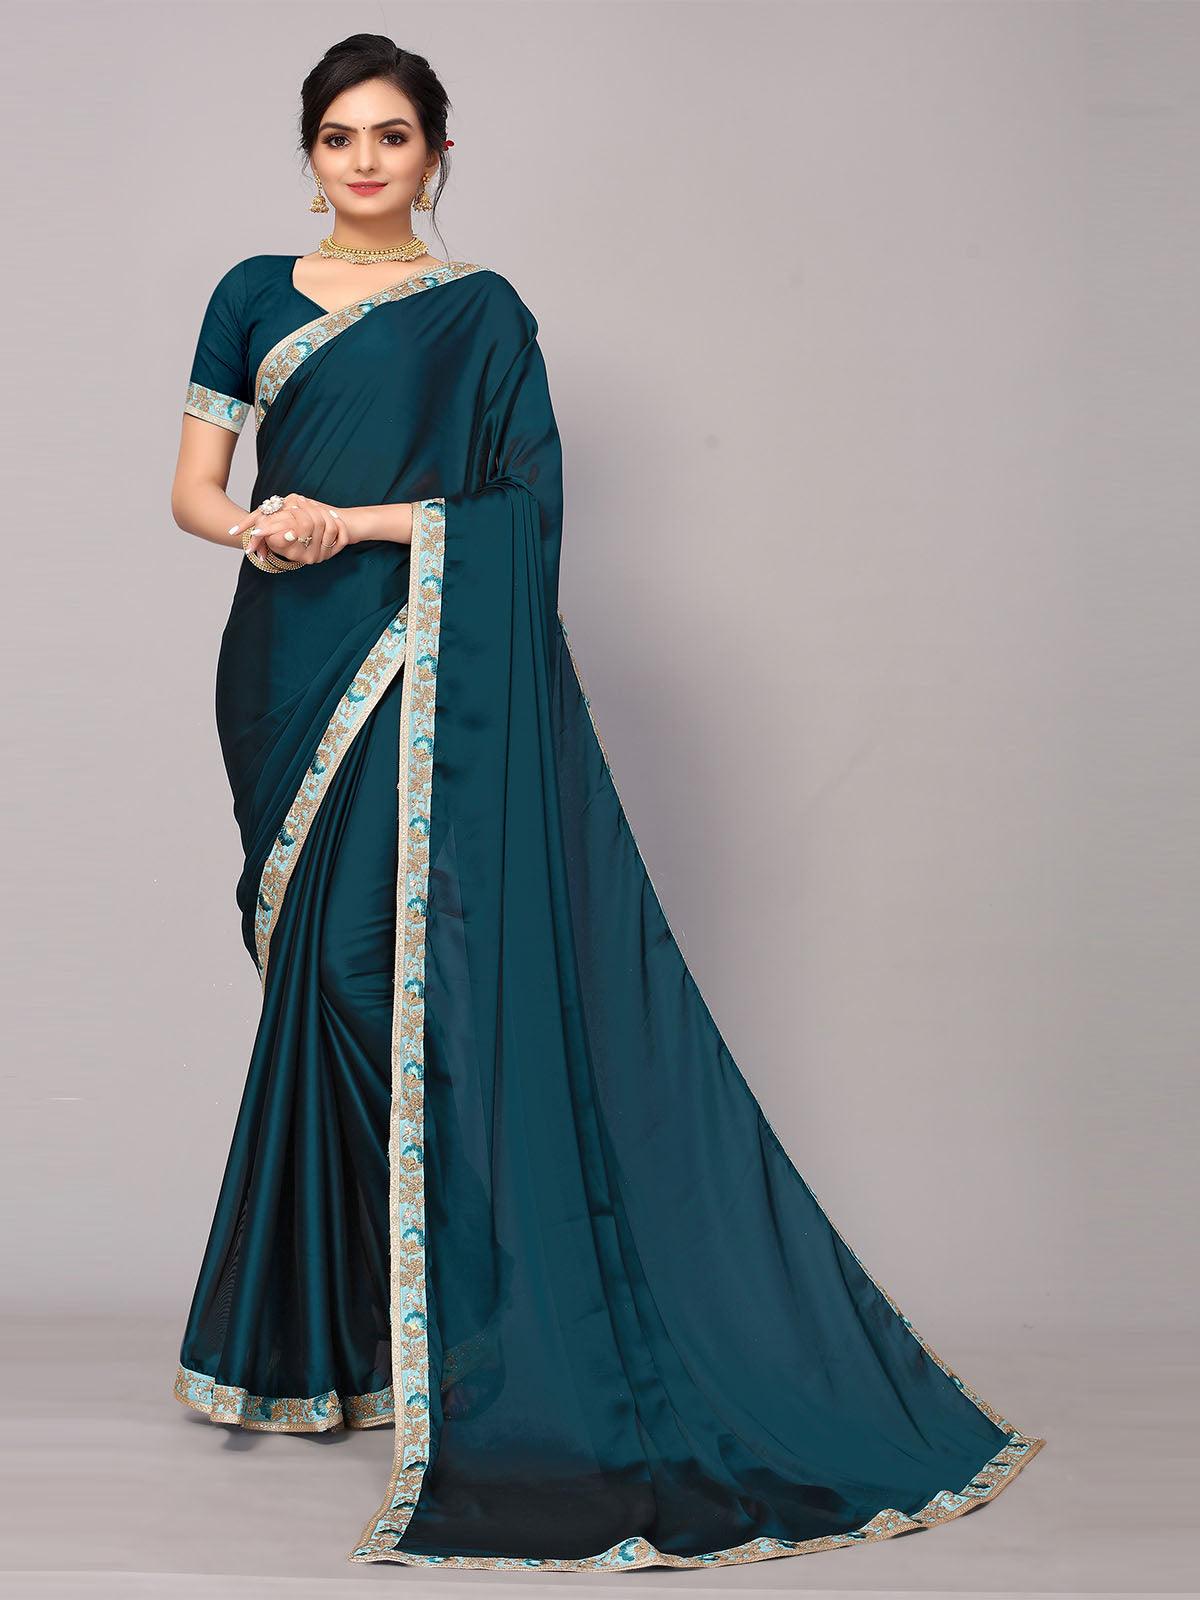 Women's Blue Satin Georgette Embroidery Border Work Saree With Blouse. - Odette